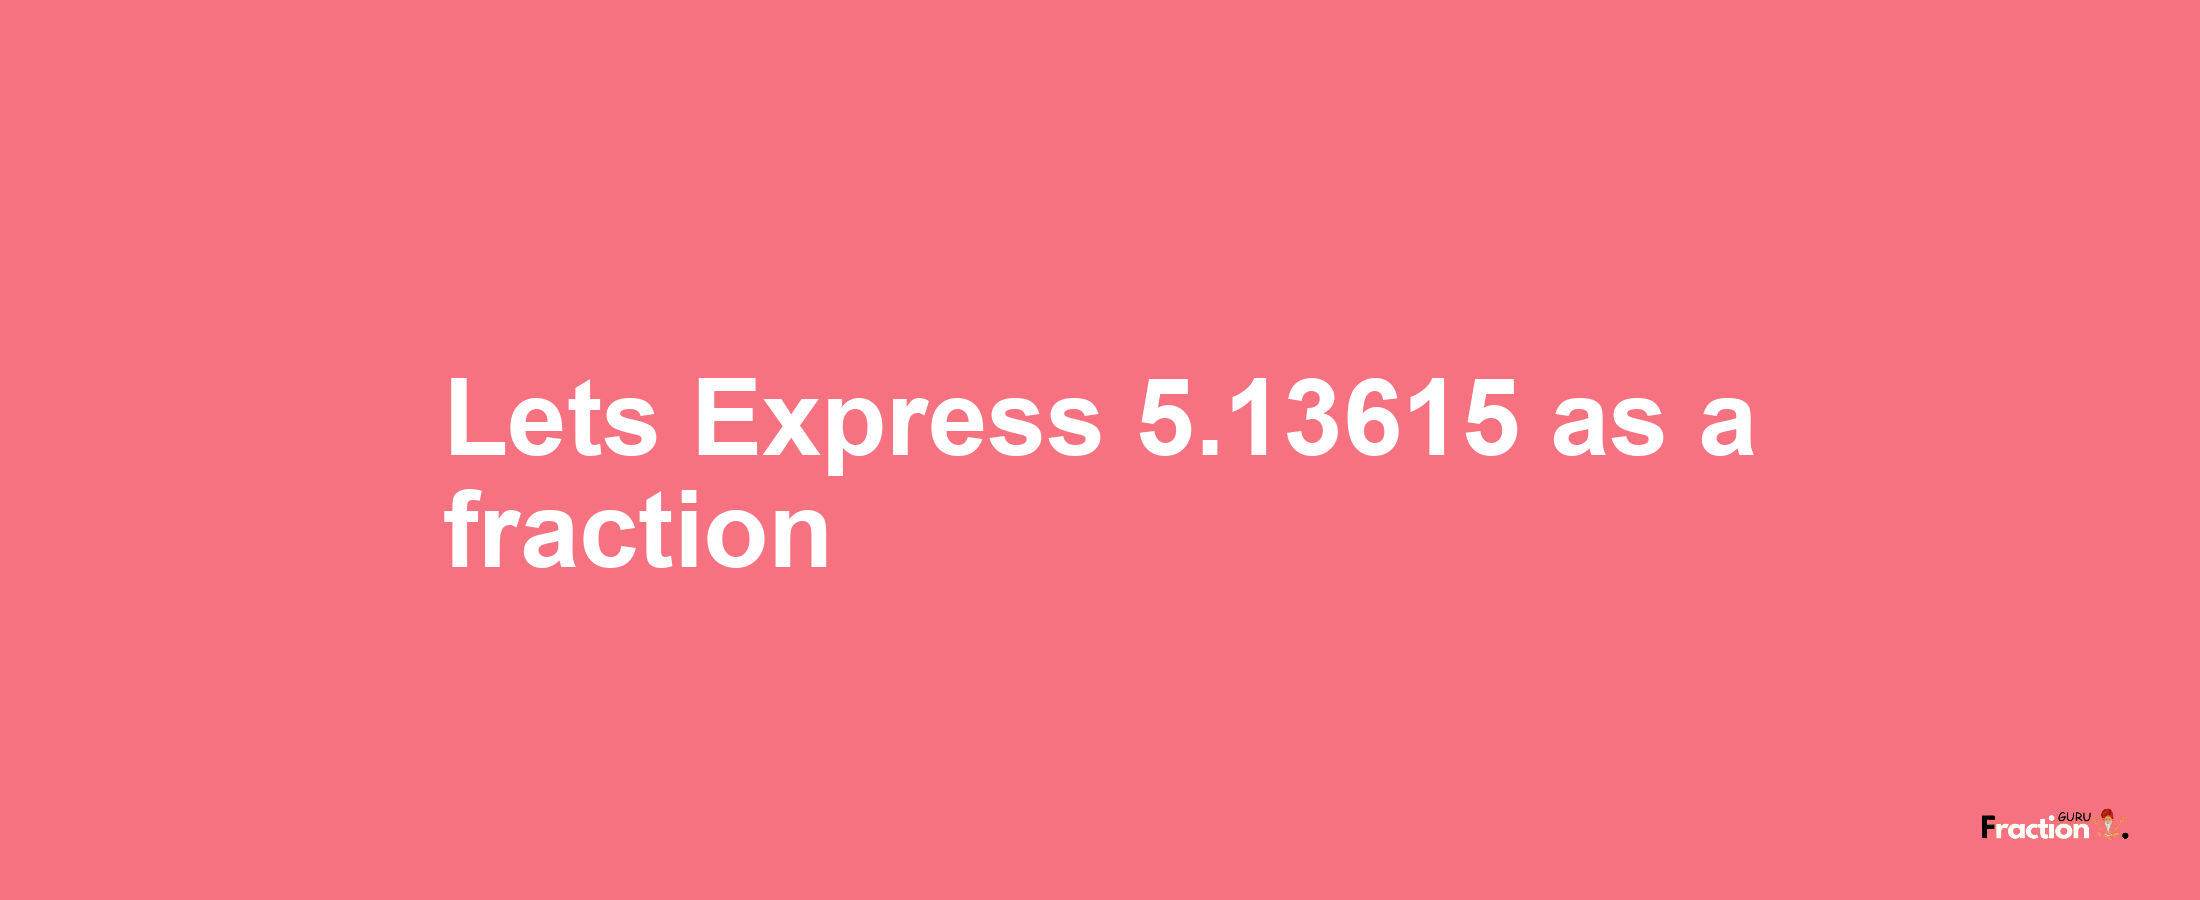 Lets Express 5.13615 as afraction